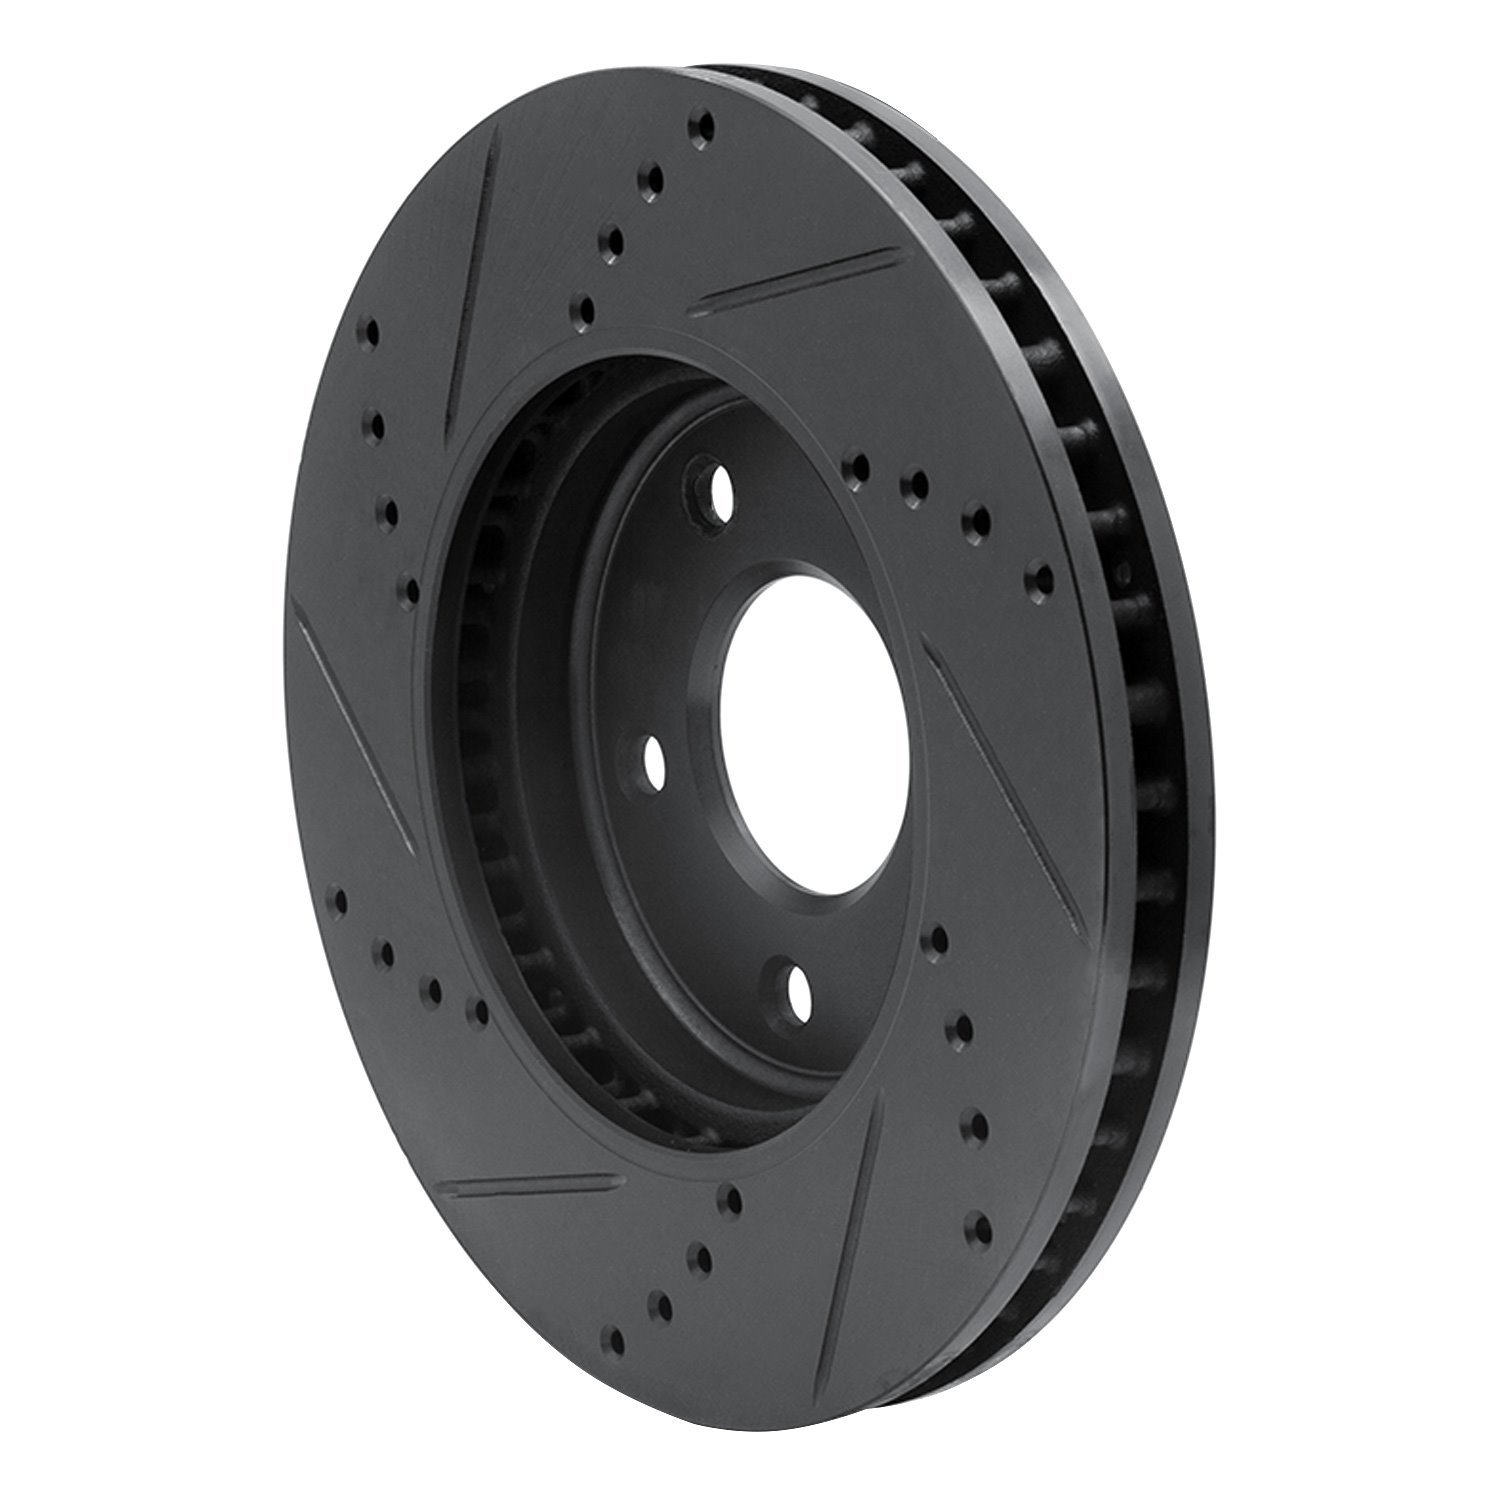 E-Line Drilled & Slotted Black Brake Rotor, Fits Select Fits Multiple Makes/Models, Position: Front Right